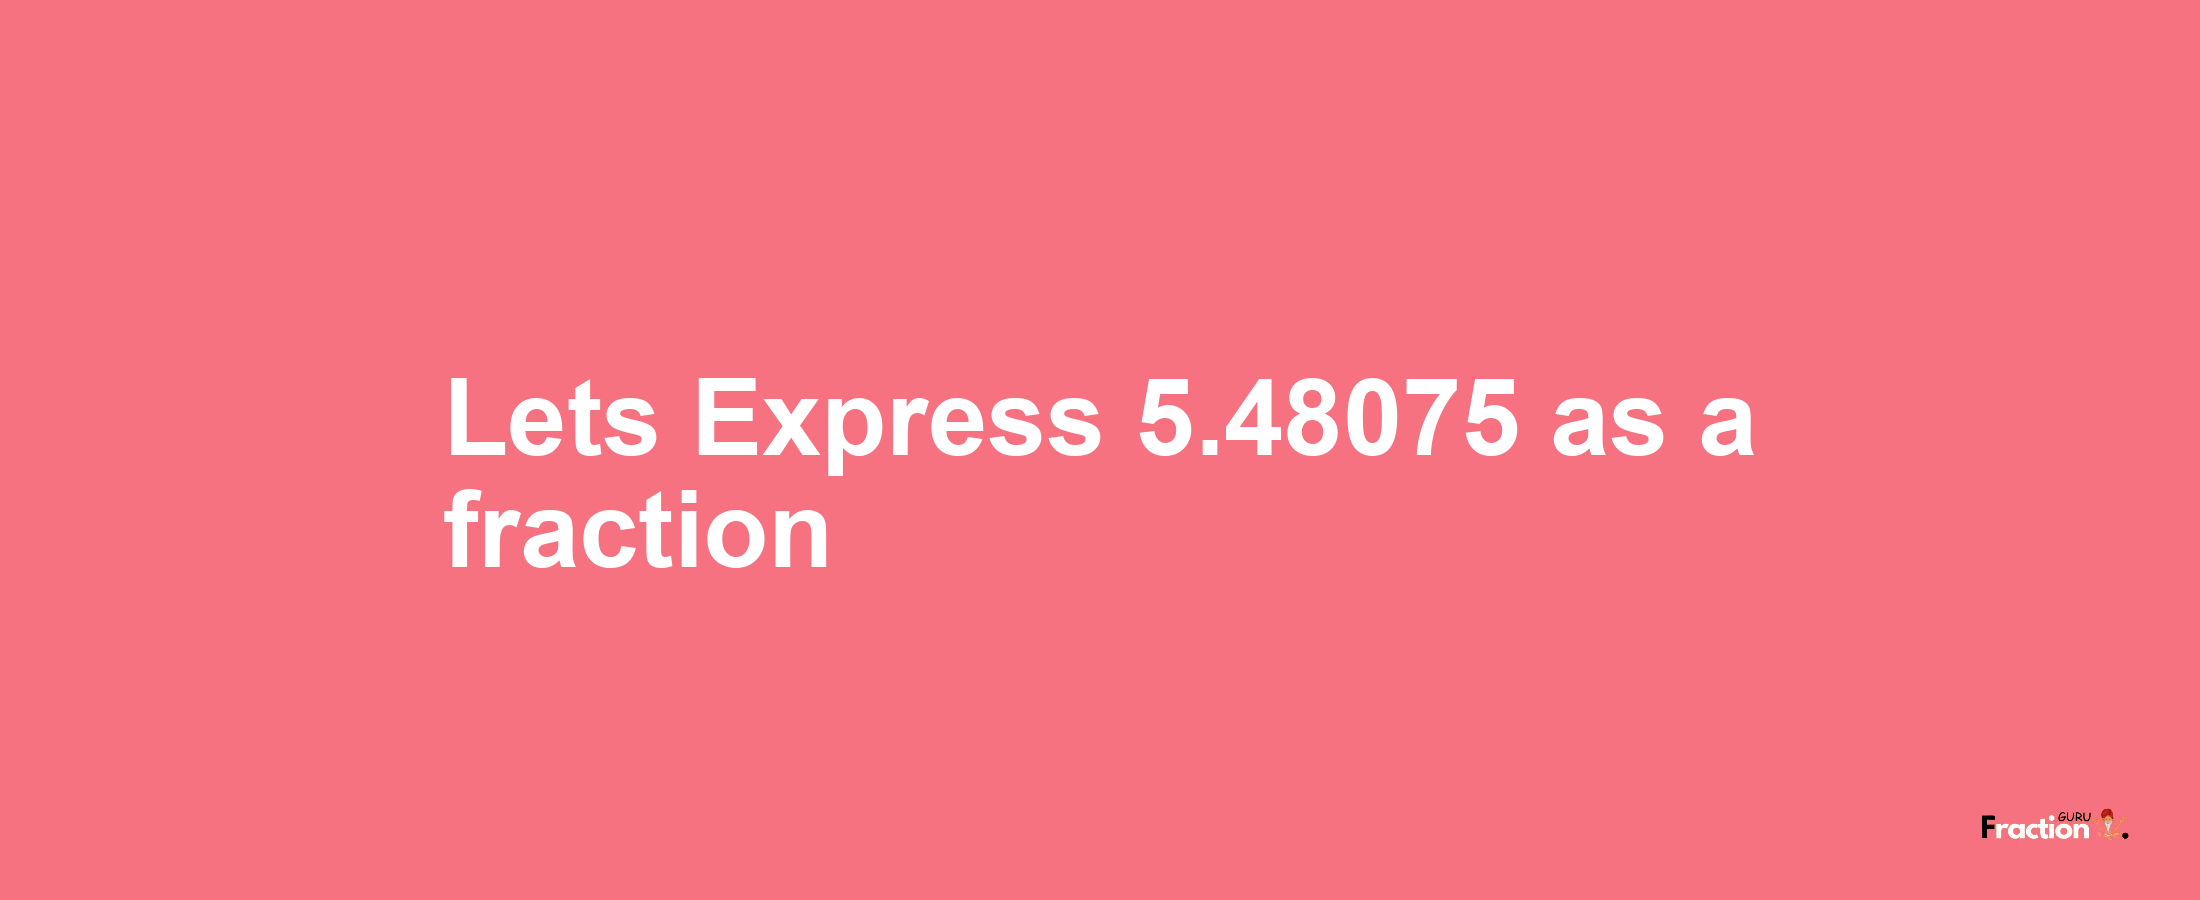 Lets Express 5.48075 as afraction